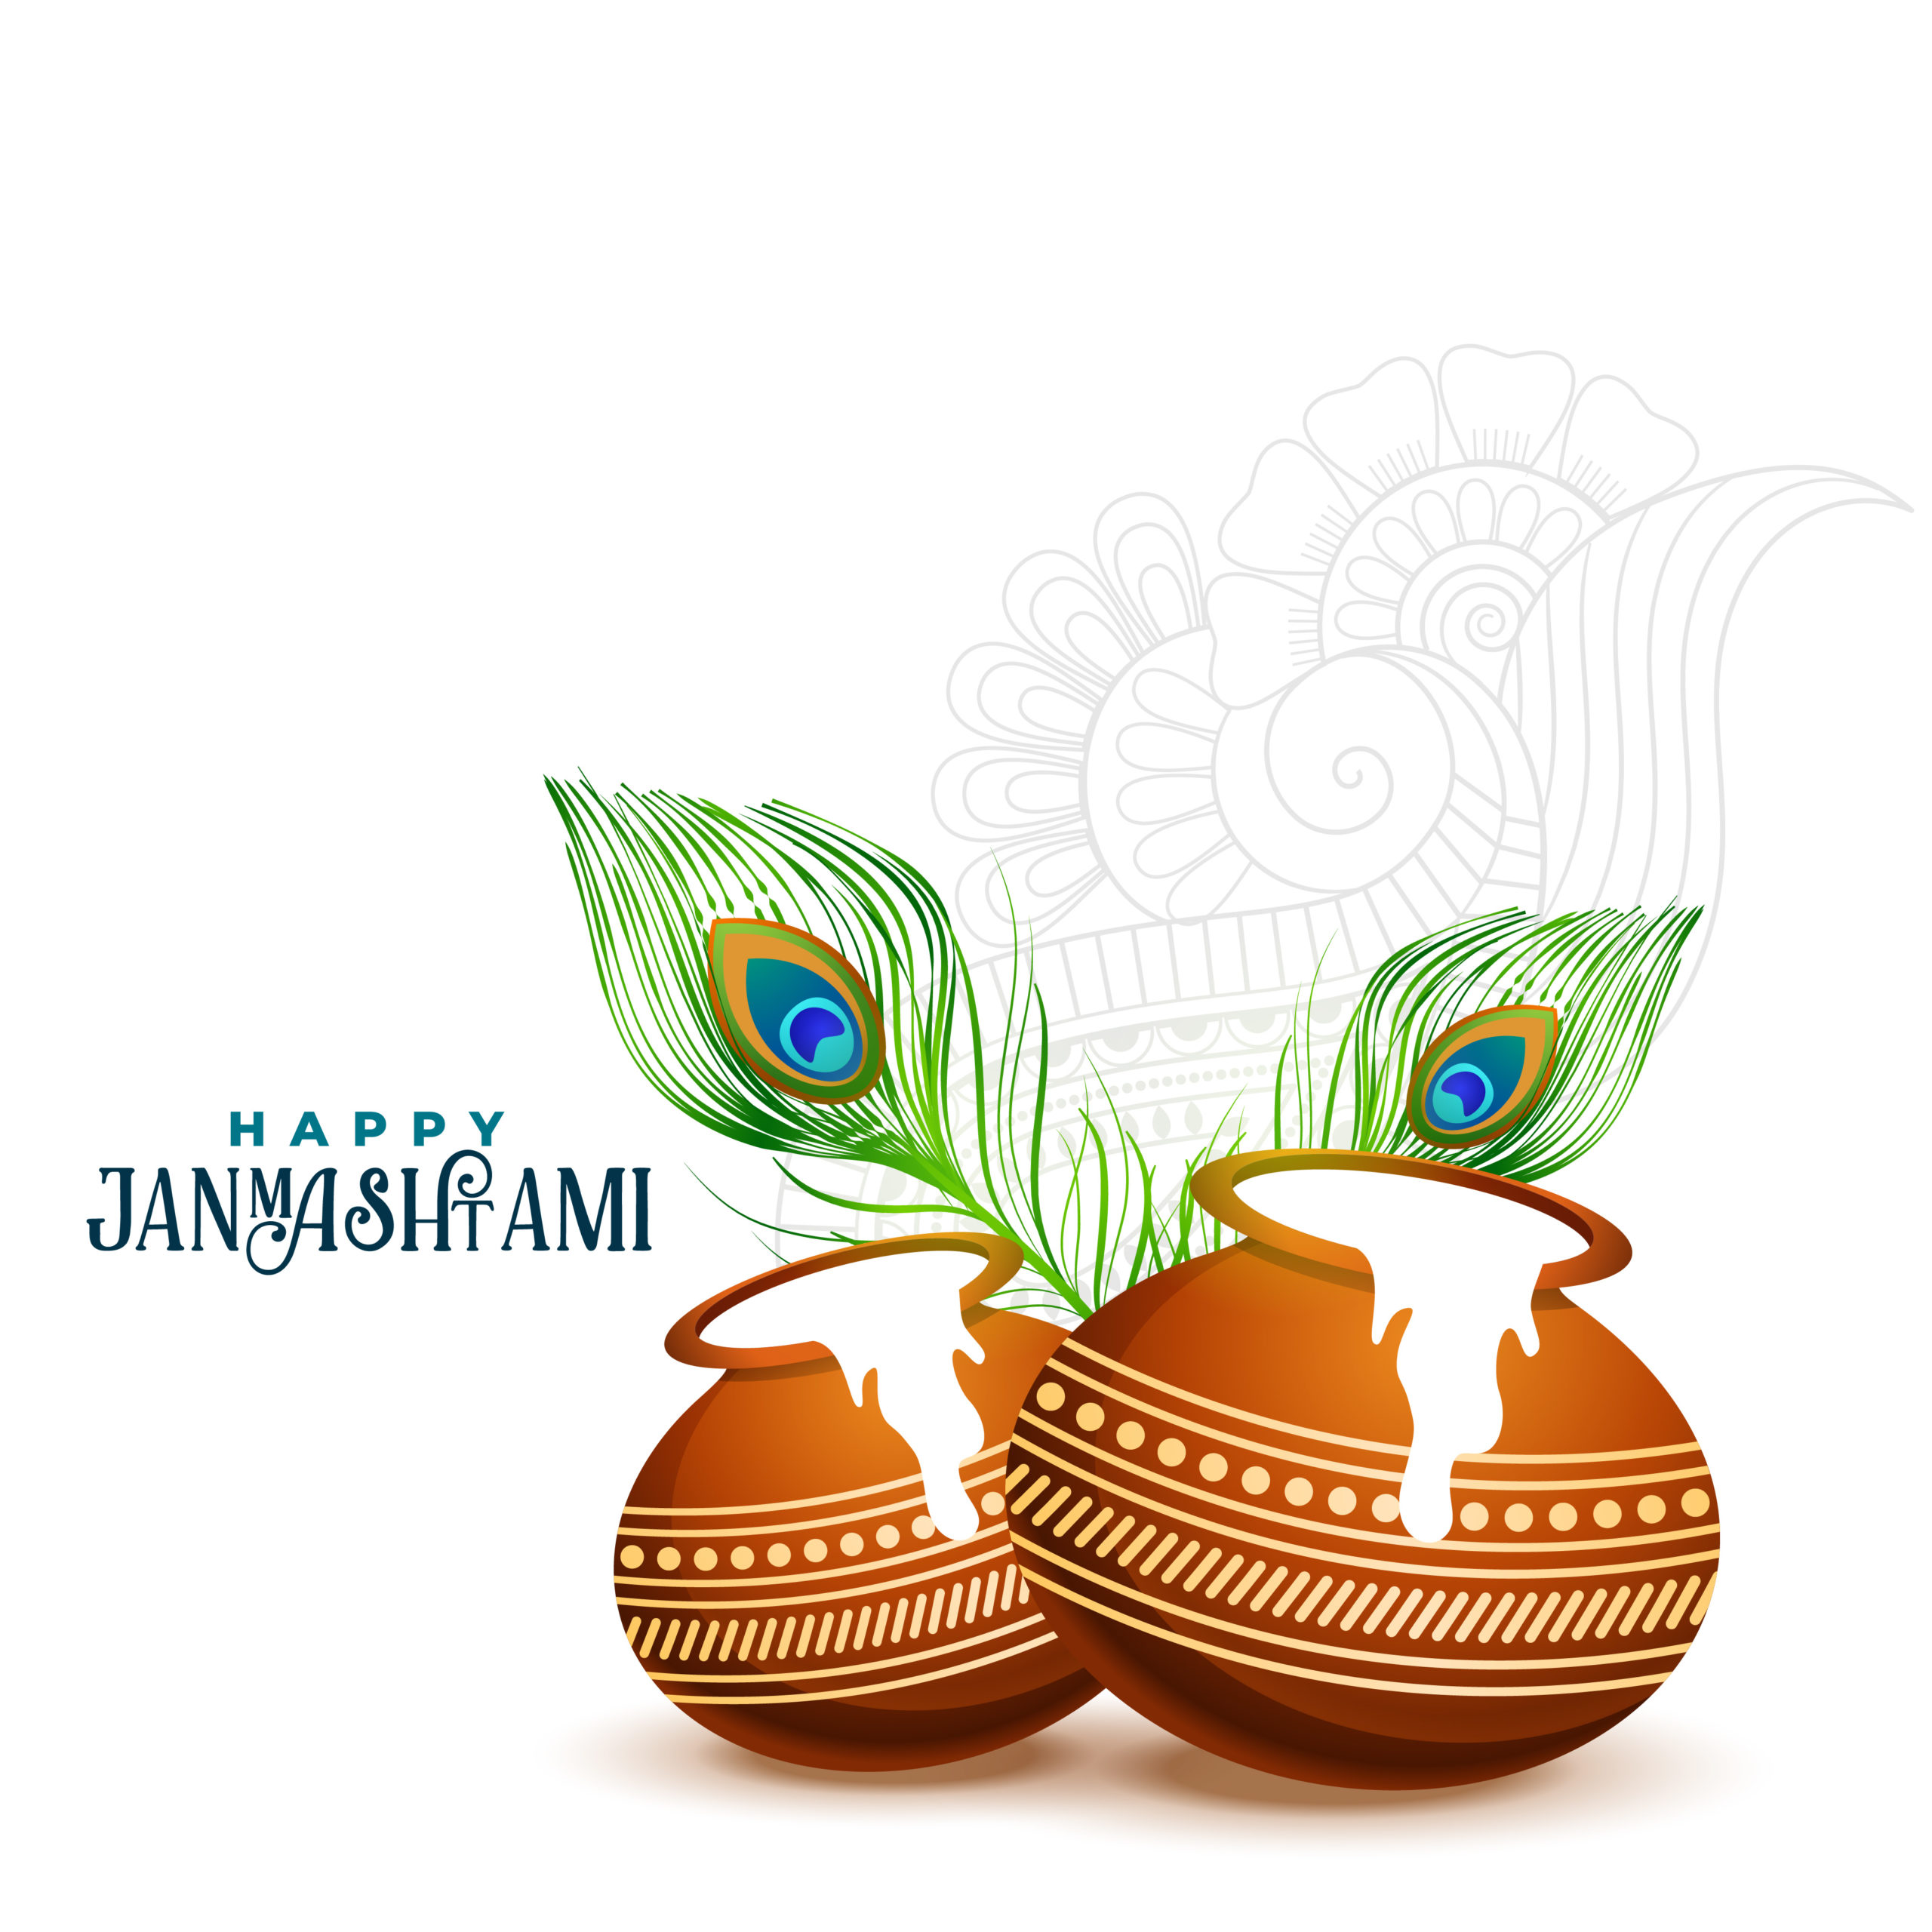 Krishna Janmashtami 2022: HD Images, Wishes, Quotes, Messages, Greetings, Shayari, Instagram Captions, and WhatsApp DP to greet your loved ones